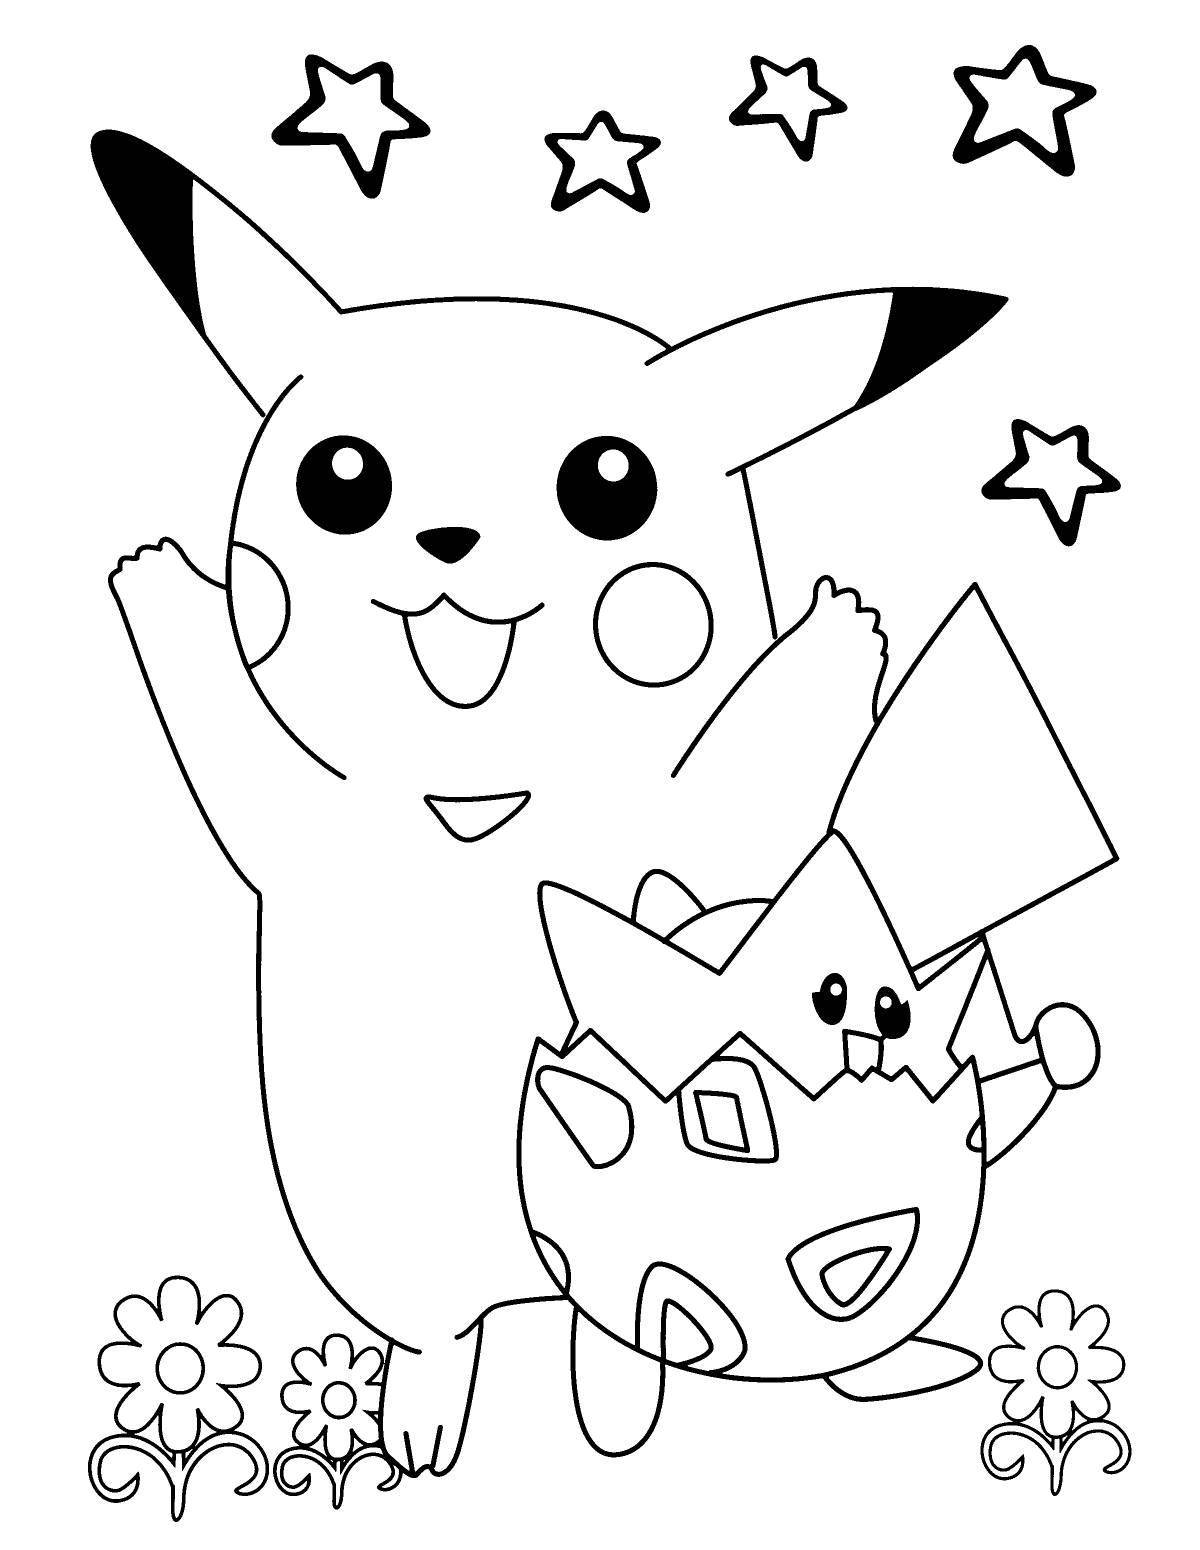 Coloring pikachu for girls